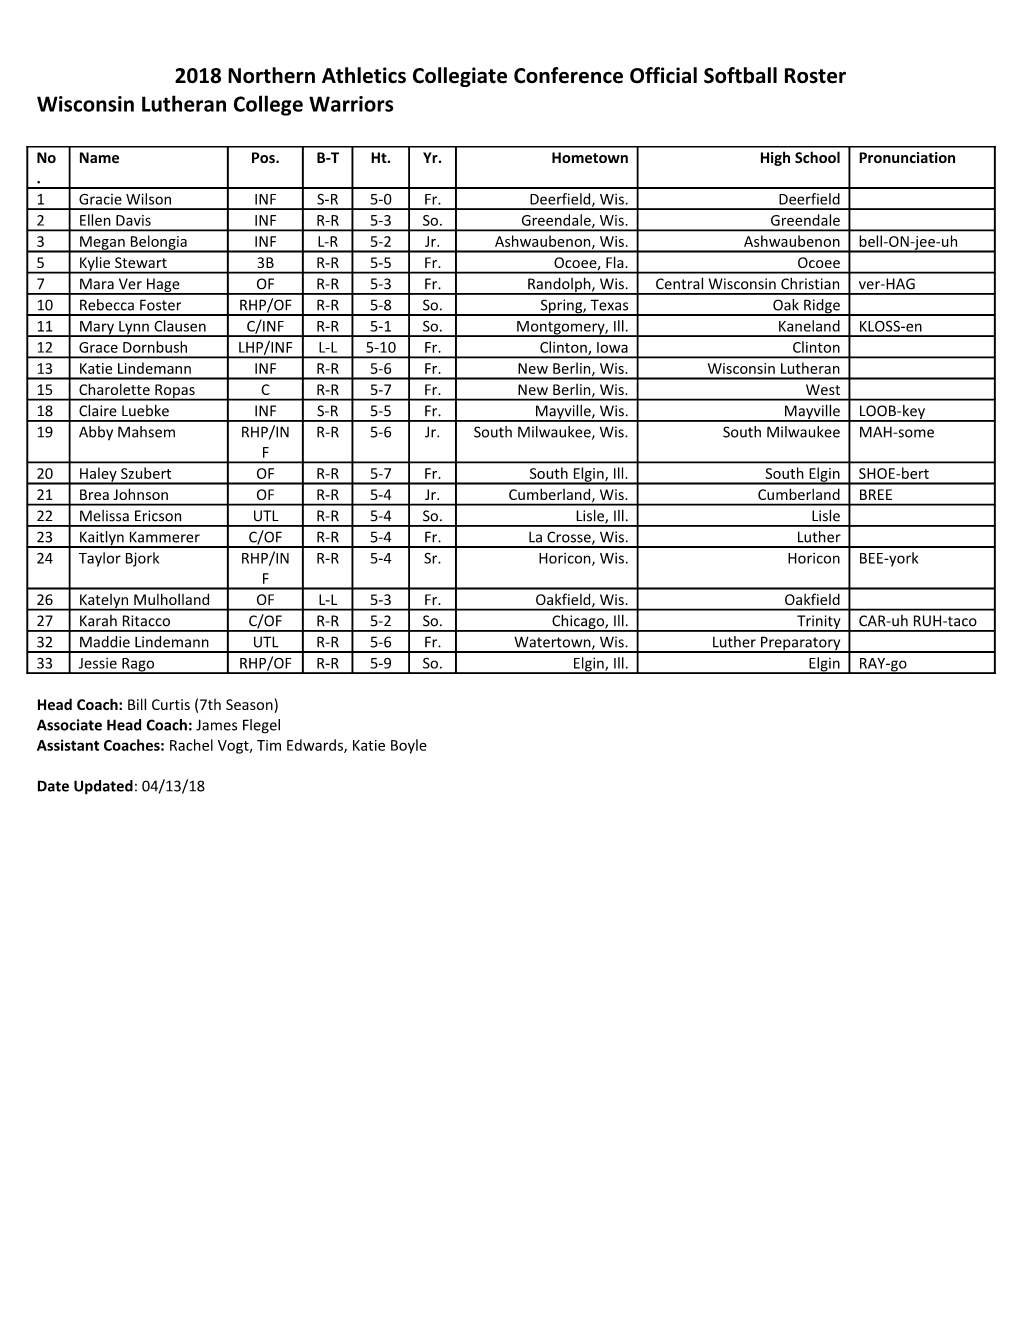 NACC Official Softball Roster